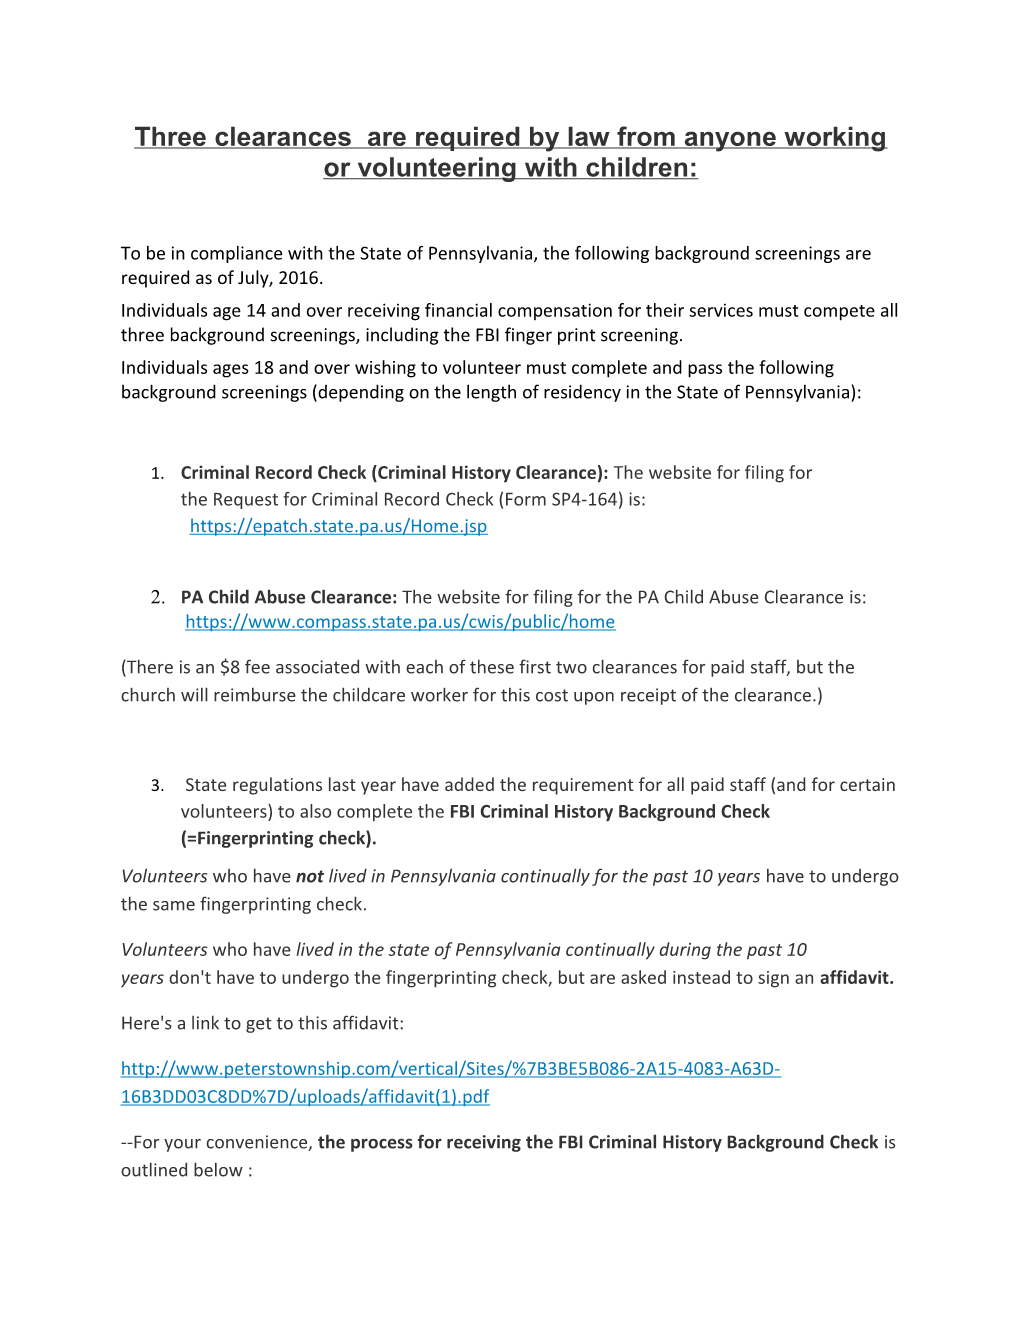 Three Clearances Arerequired by Law from Anyone Working Or Volunteering with Children